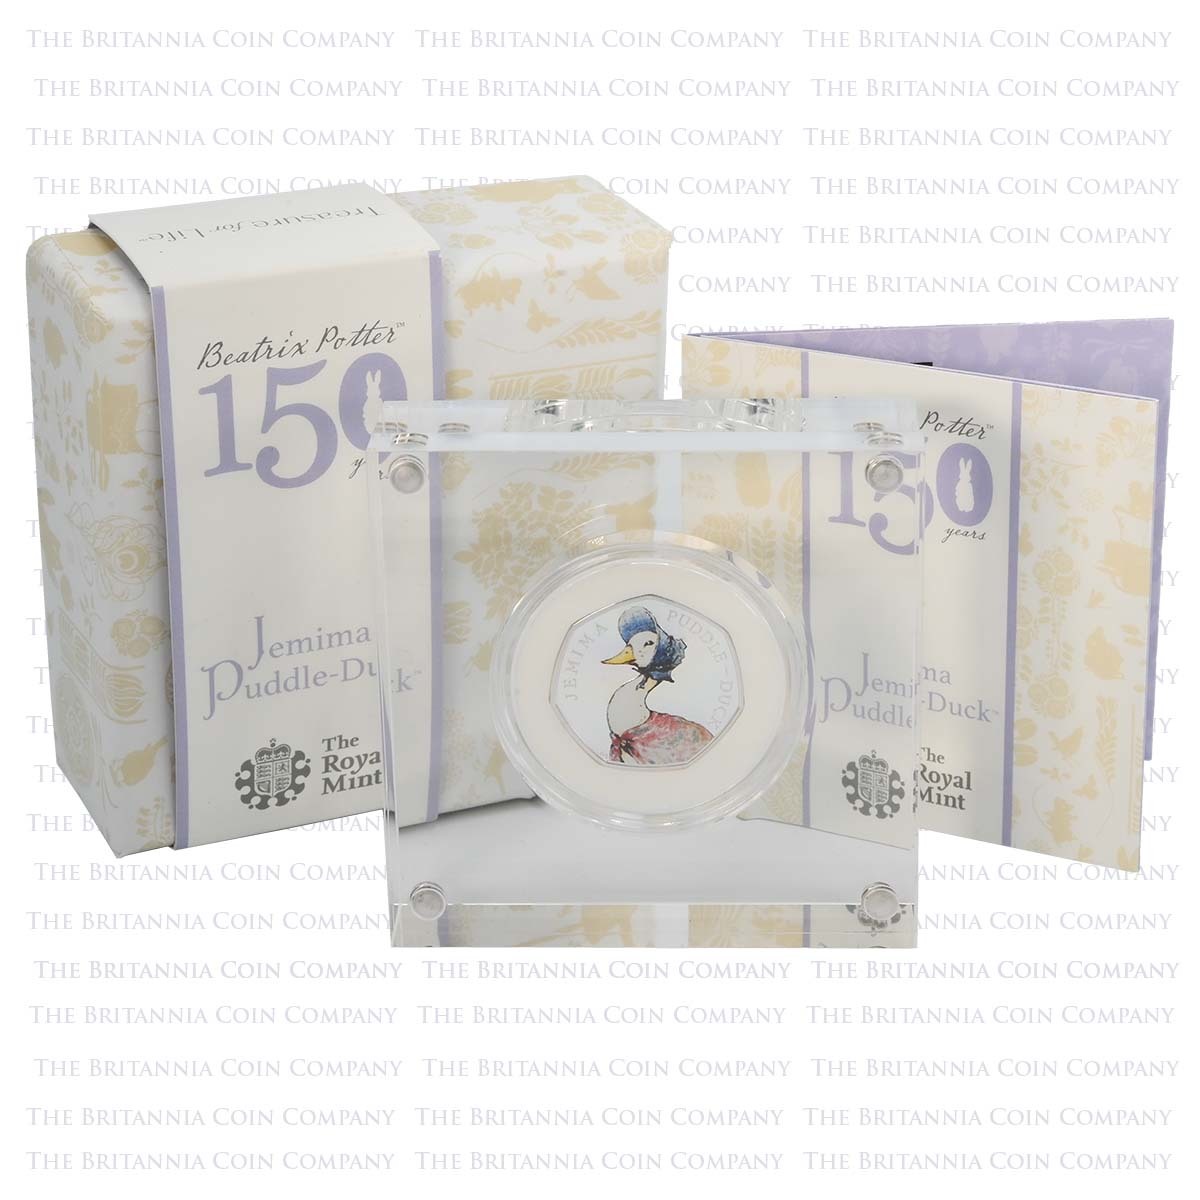 UK16BJPS 2016 Beatrix Potter Jemima Puddle-Duck Fifty Pence Colour Printed Silver Proof Coin Boxed